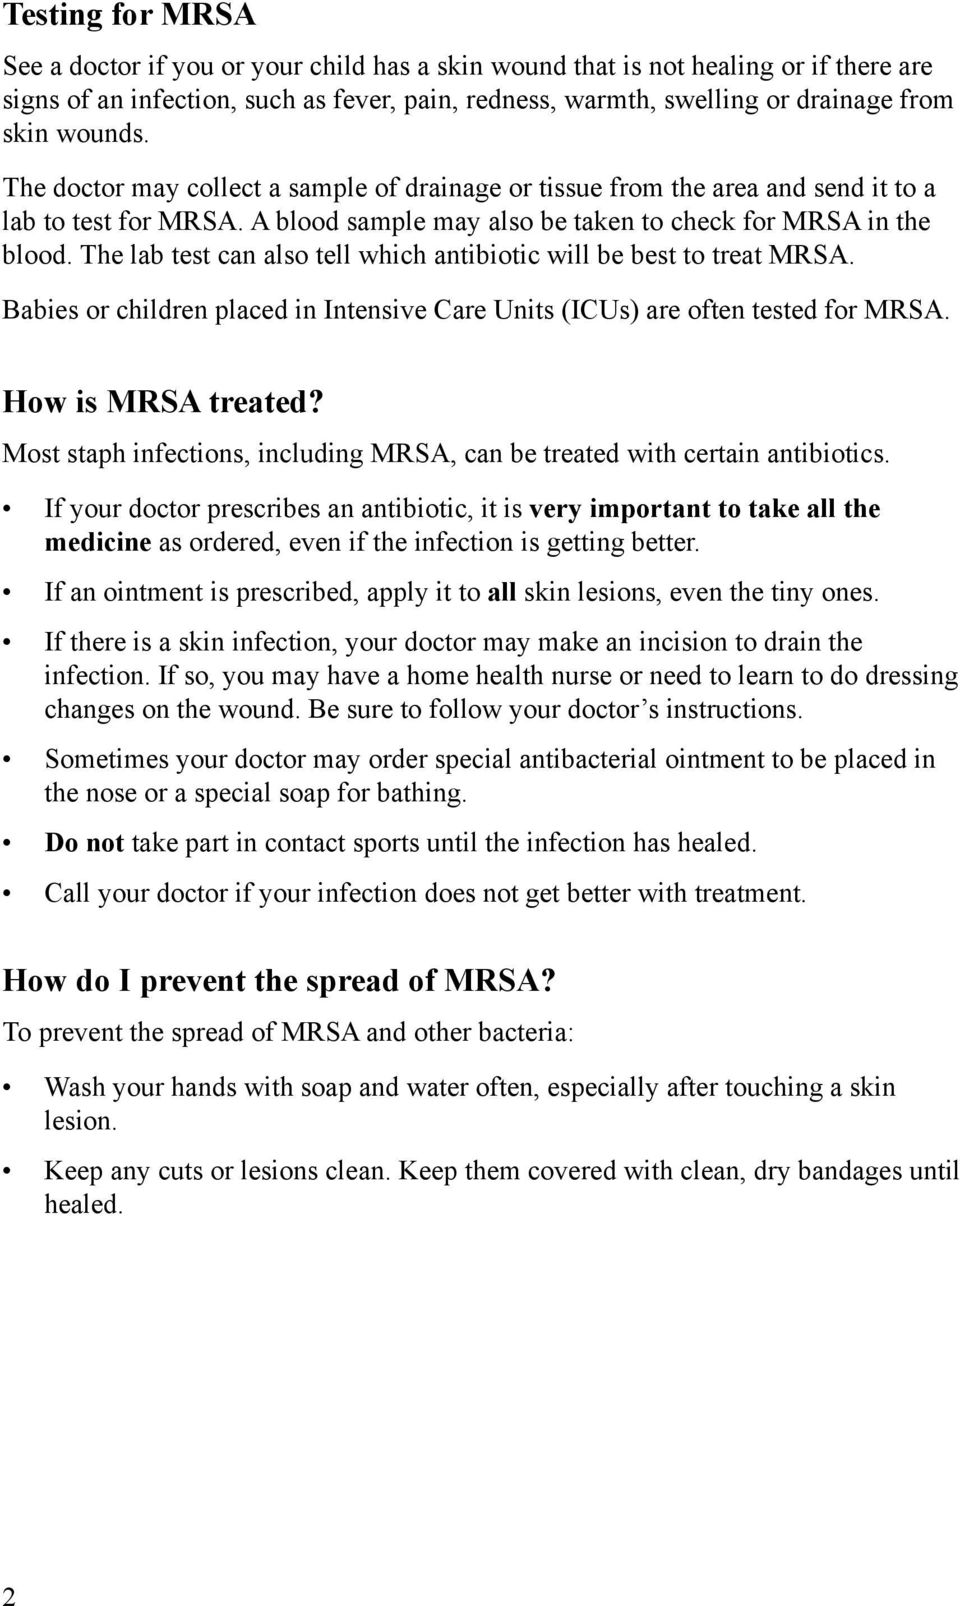 The lab test can also tell which antibiotic will be best to treat MRSA. Babies or children placed in Intensive Care Units (ICUs) are often tested for MRSA. How is MRSA treated?